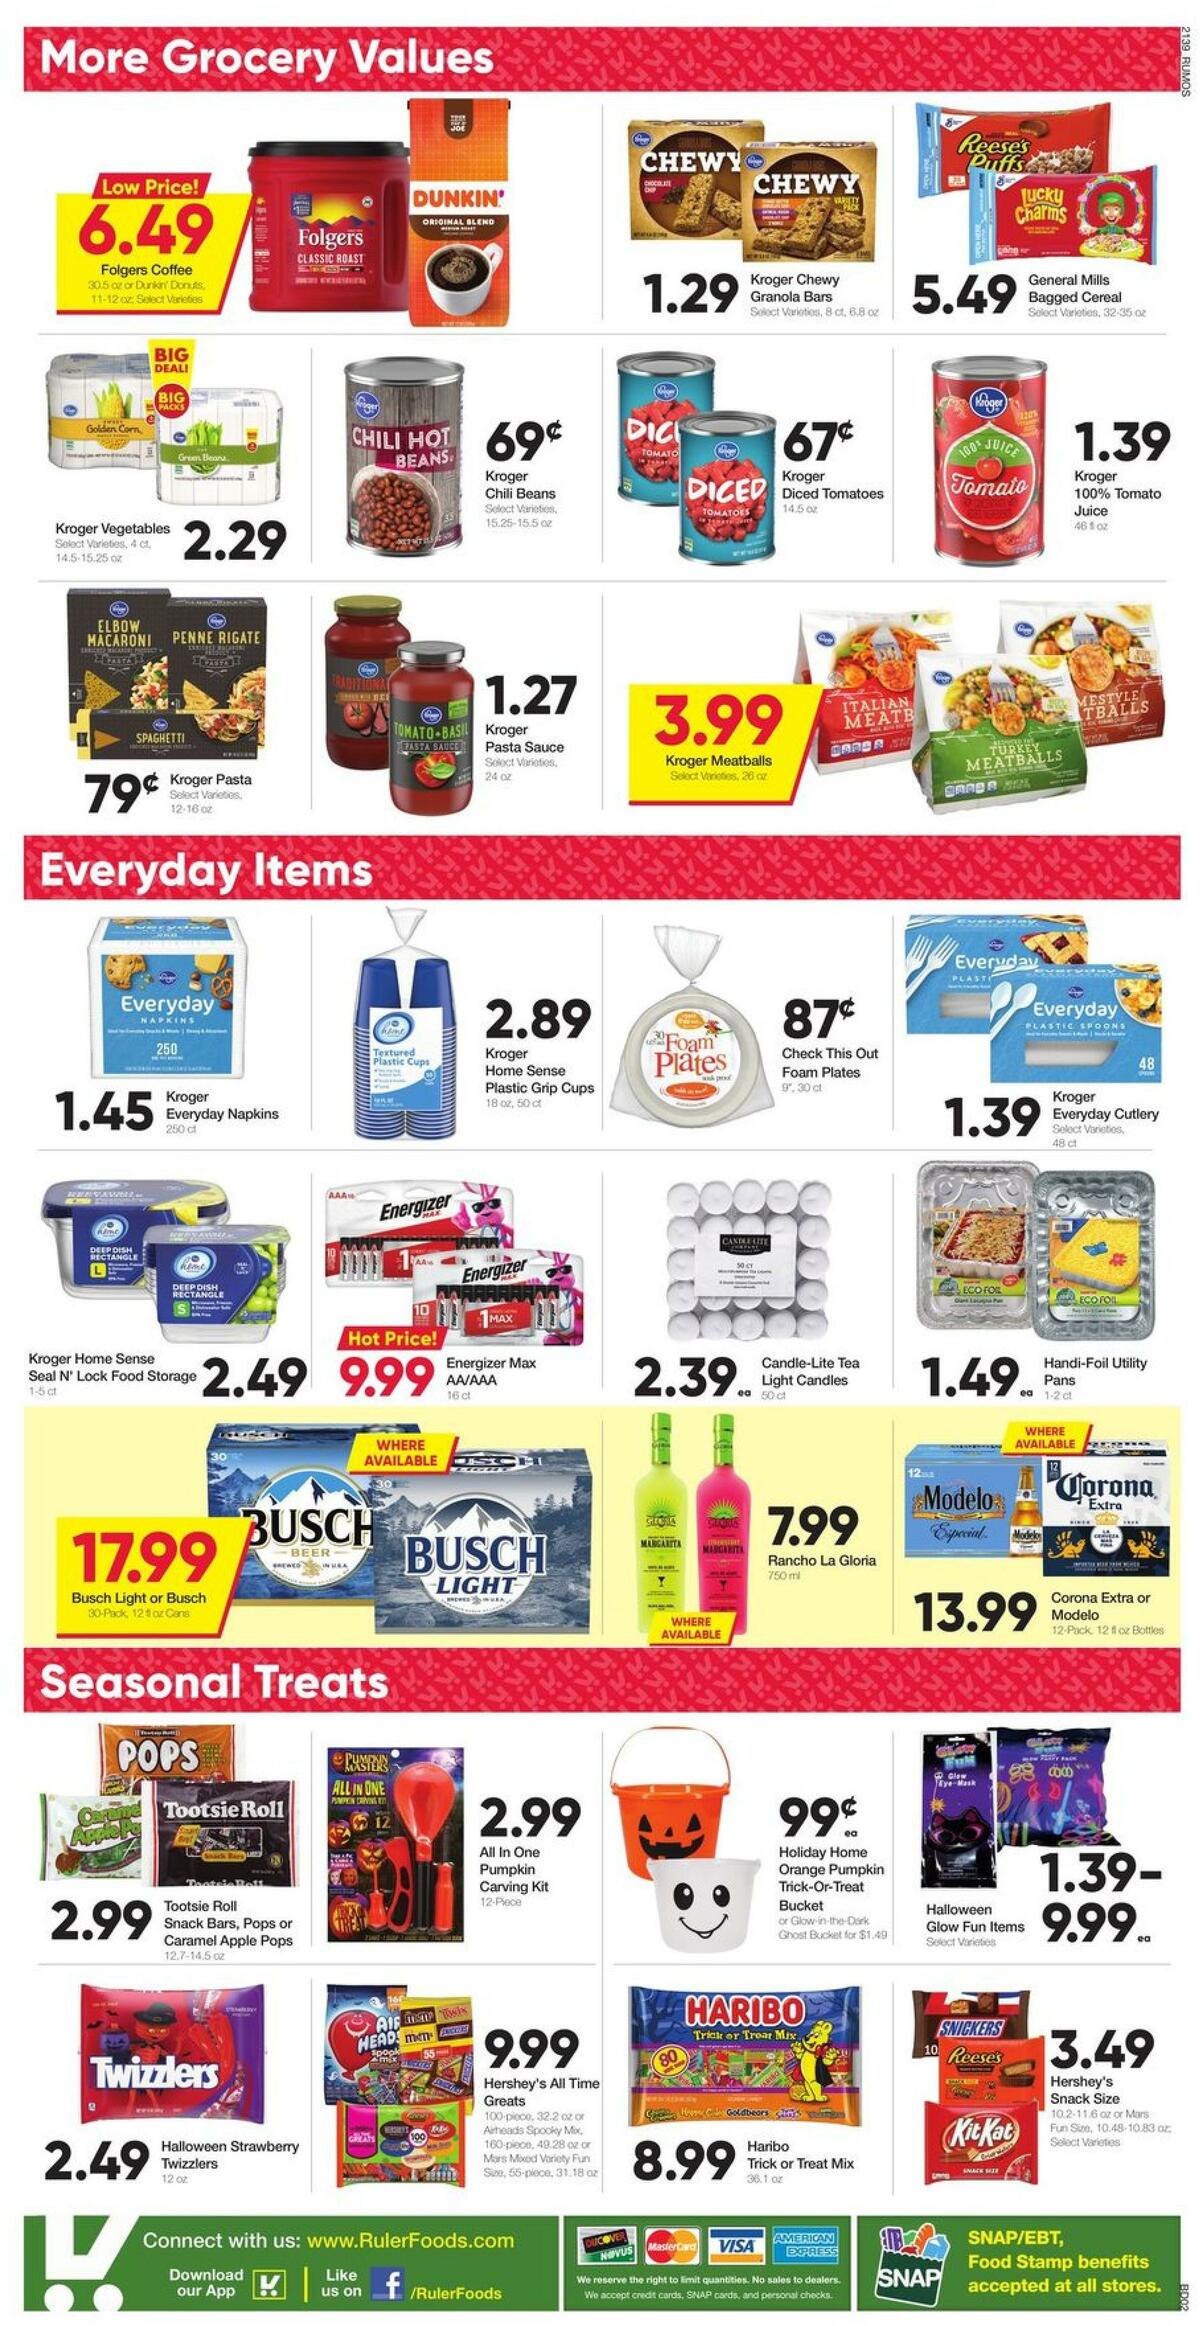 Ruler Foods Best Offers And Special Buys From October 27 Page 2